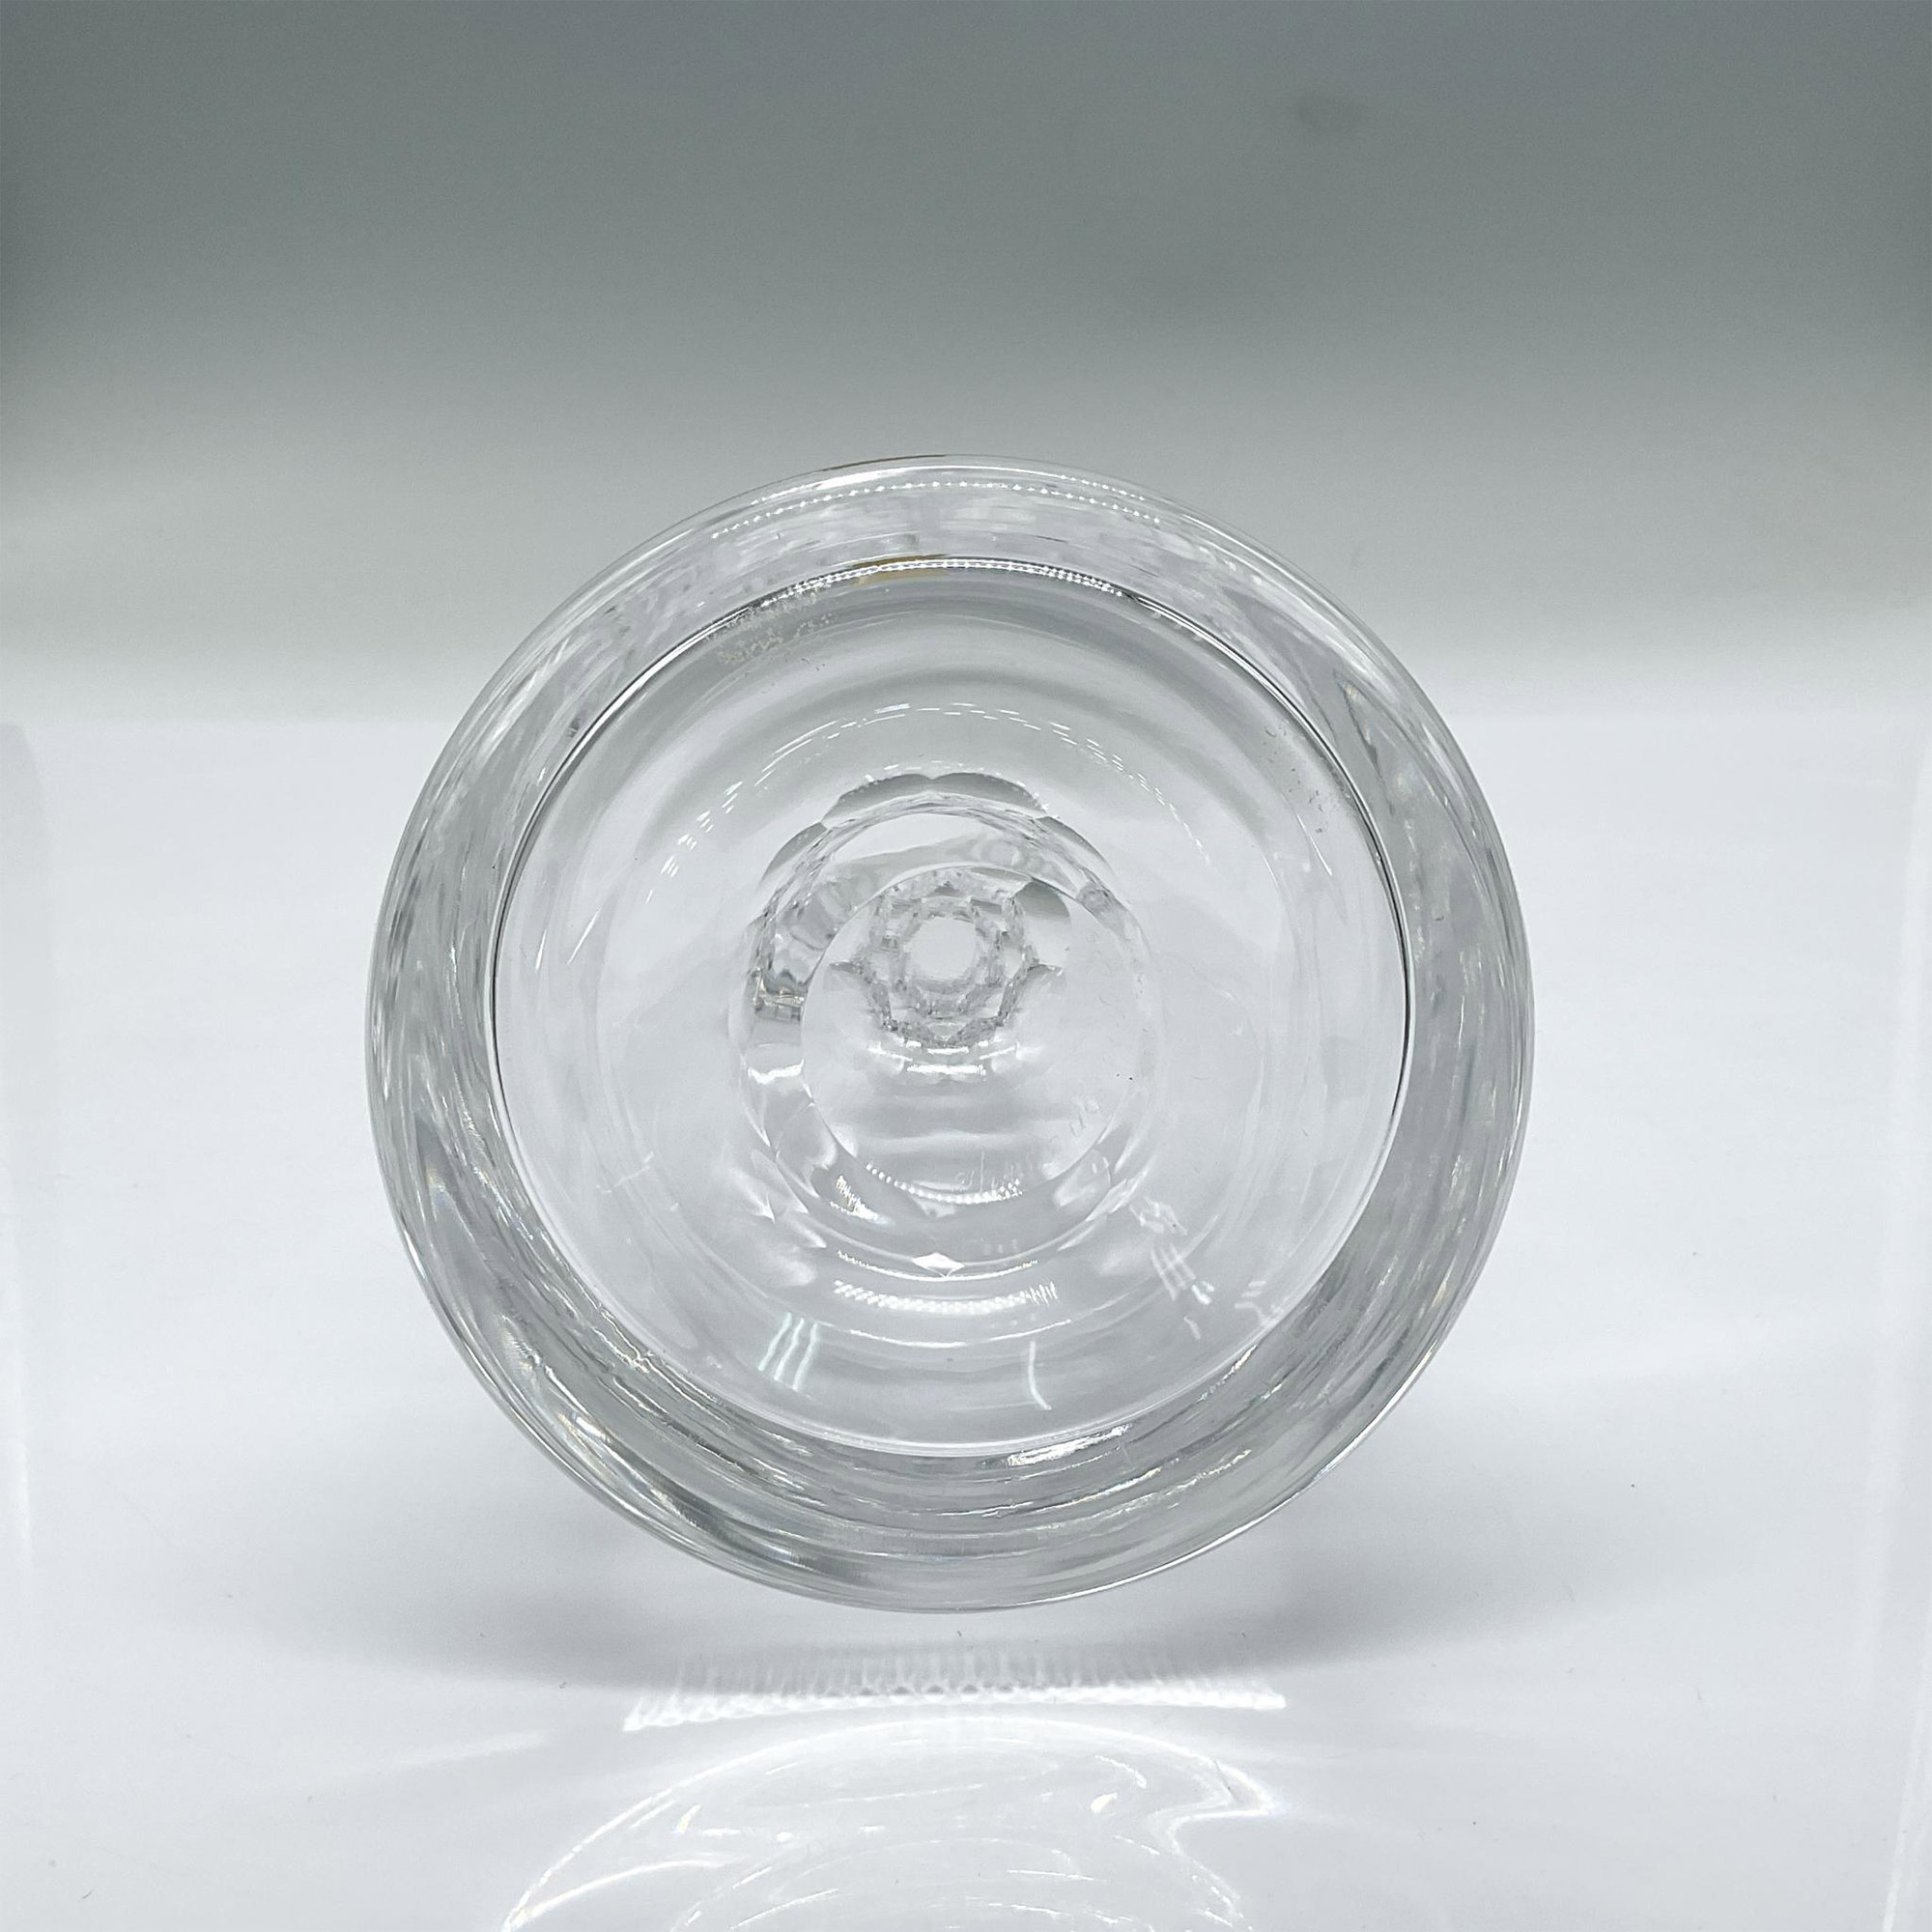 Orrefors Crystal Decanter, Carina - Image 3 of 4